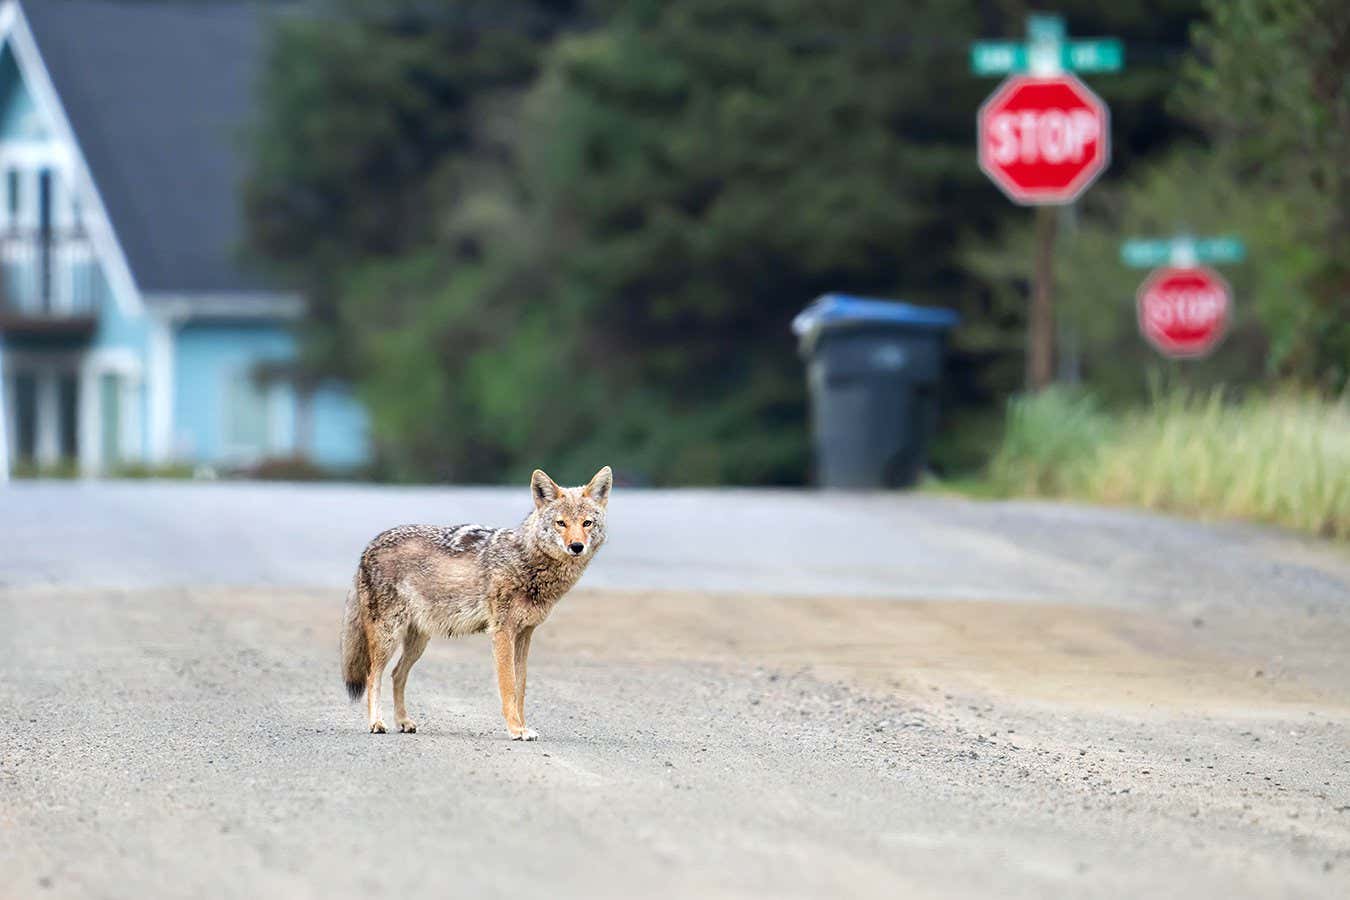 A coyote stands in the middle of a section of dirt road. Paved road, a blue house, a rubbish bin, and stop signs are out of focus in the background.